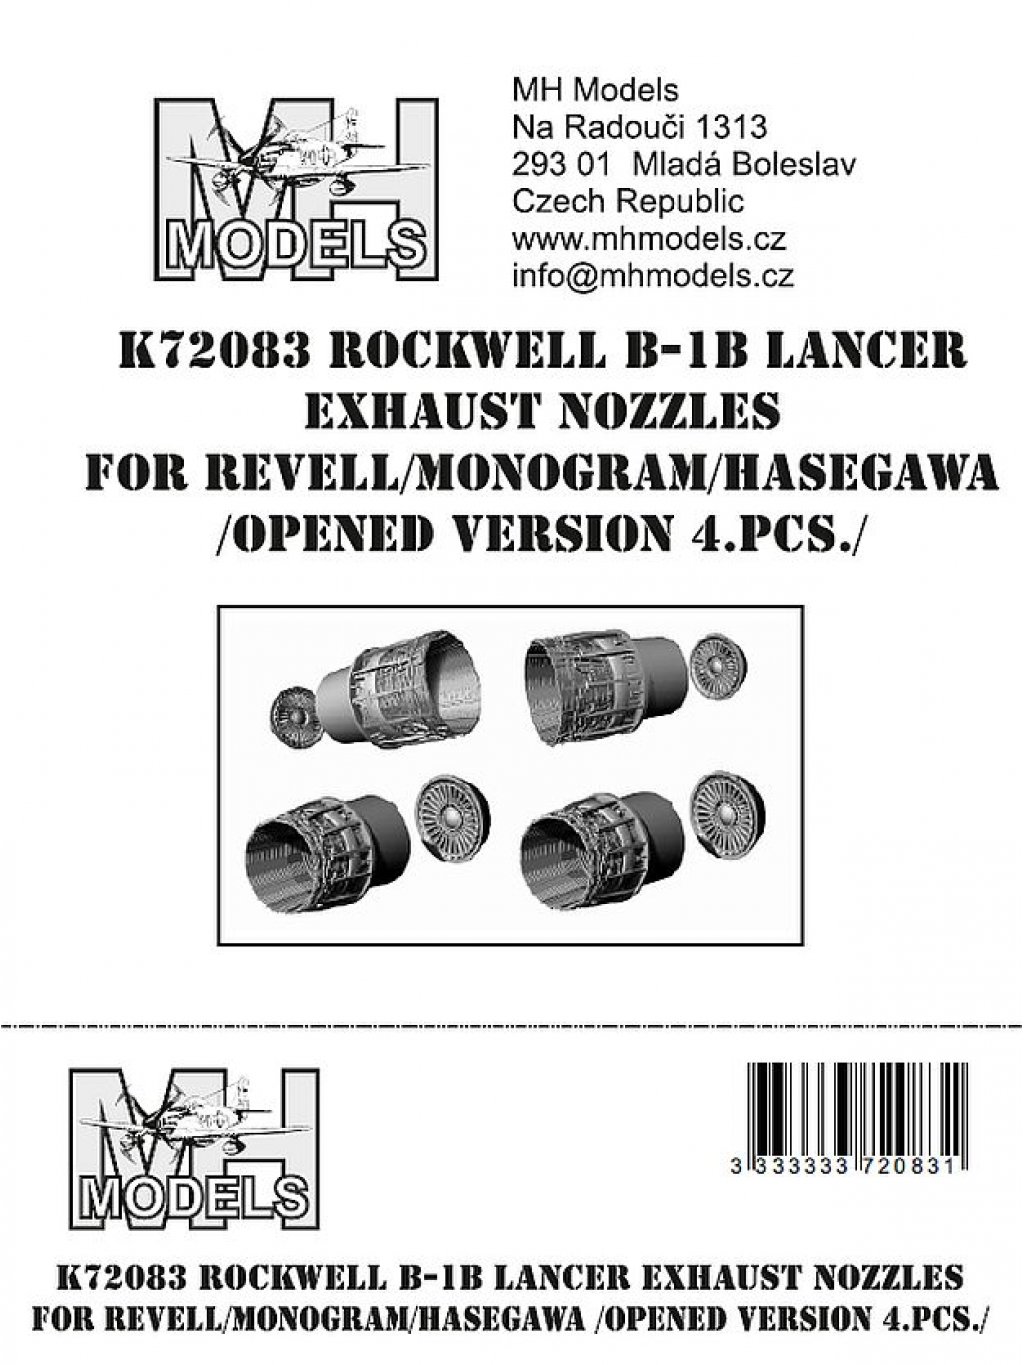 Rockwell B-1B Lancer exhaust nozzles for Revell/Monogram/Hasegawa (opened version 4pcs)